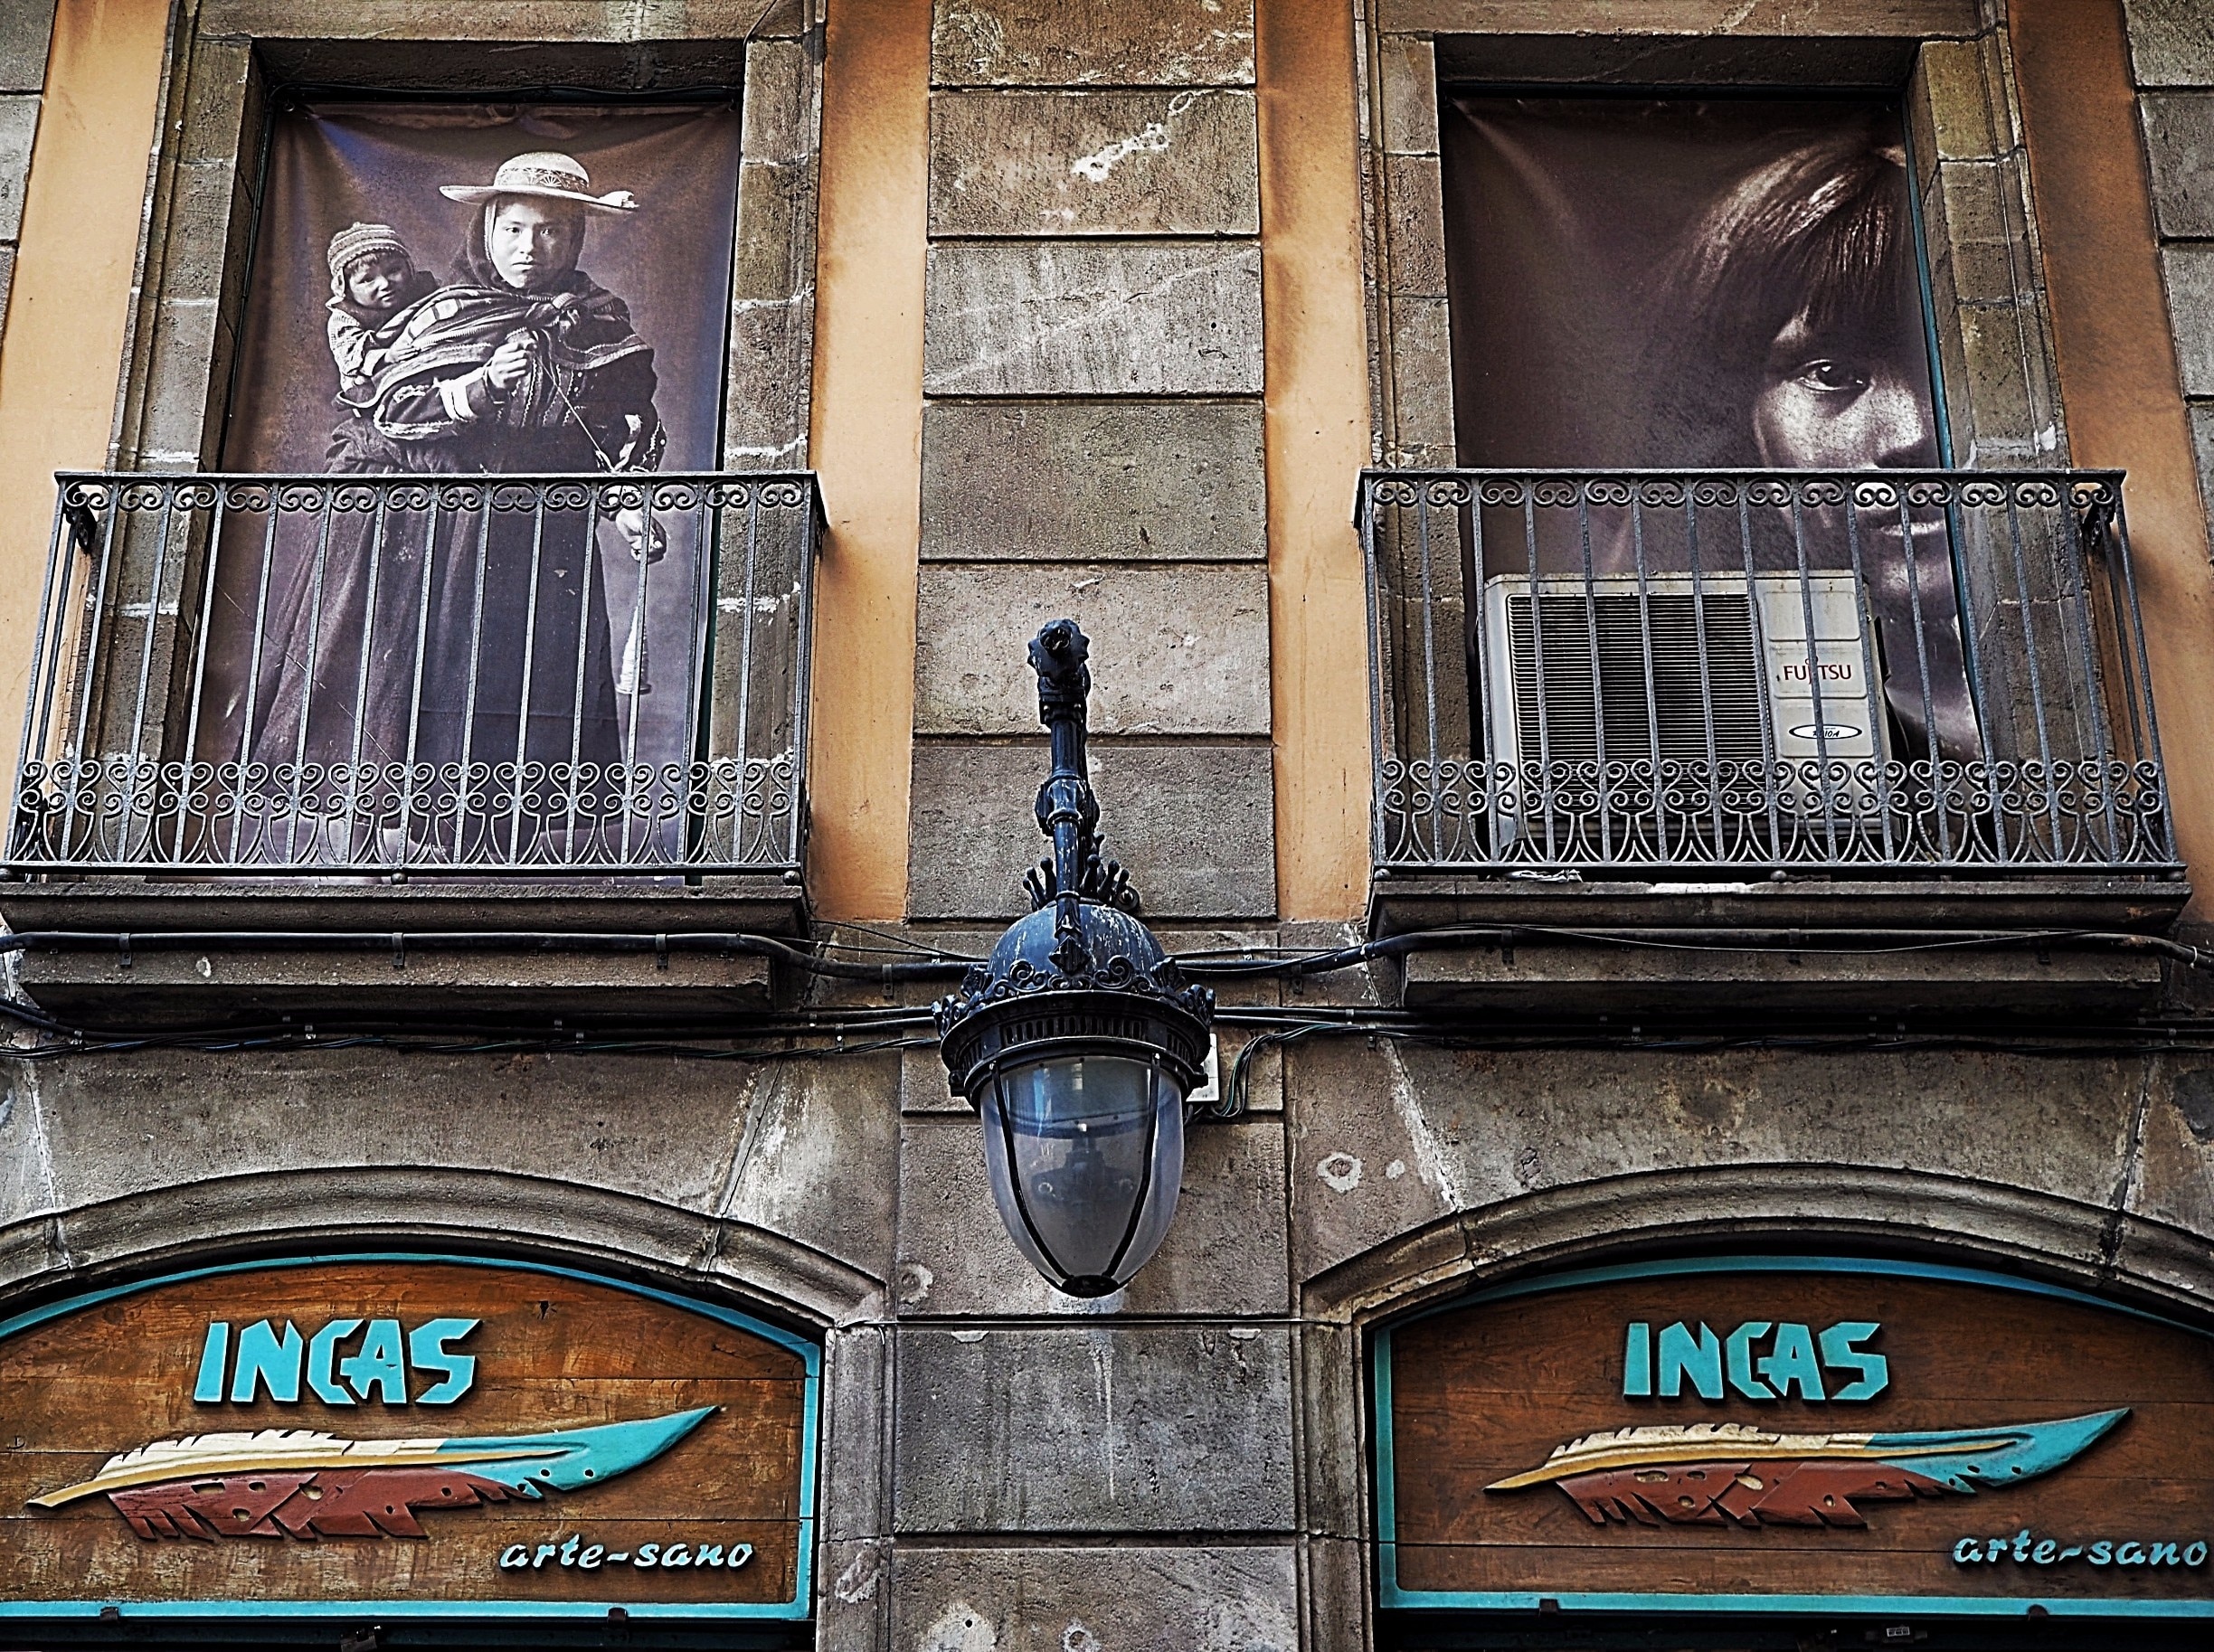 On the edge of the Gothic barrio of Barcelona you reach Placa Sant Jaume and your sight gets trapped by the walls of a building picturing faces and expressions of Inca people. Downstairs you can get lost  in their authentic shop exposing products with typical Inca patterns.
#Patterns